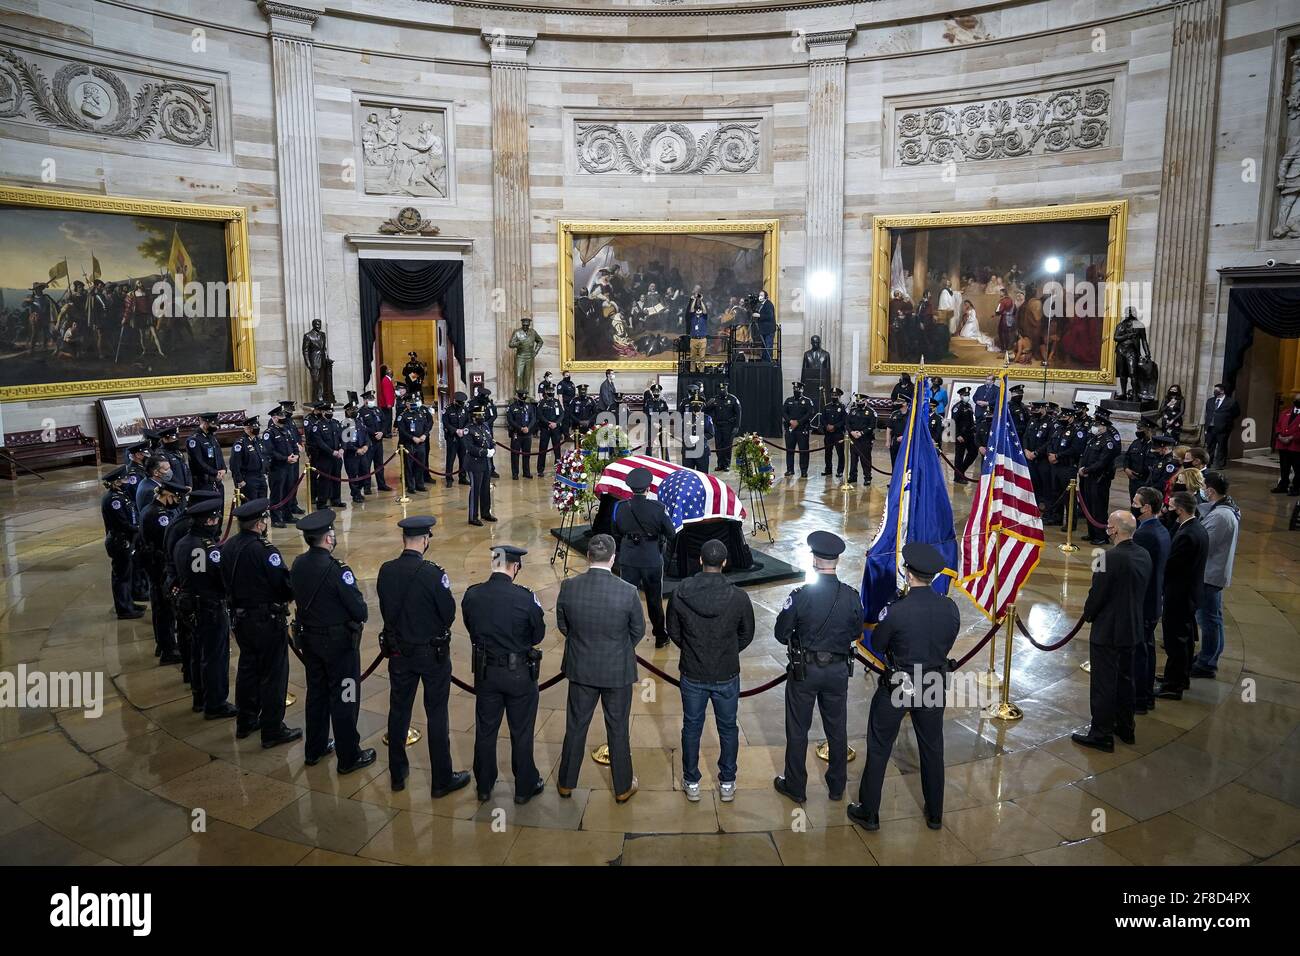 Capitol Police officers surround the casket of the late U.S. Capitol Police officer William 'Billy' Evans during a memorial service as Evans lies in honor in the Rotunda at the U.S. Capitol in Washington DC, on Tuesday April 13, 2021. Evans was killed in the line of duty during the attack outside the U.S. Capitol on April 2. Pool photo by Drew Angerer/UPI Credit: UPI/Alamy Live News Stock Photo